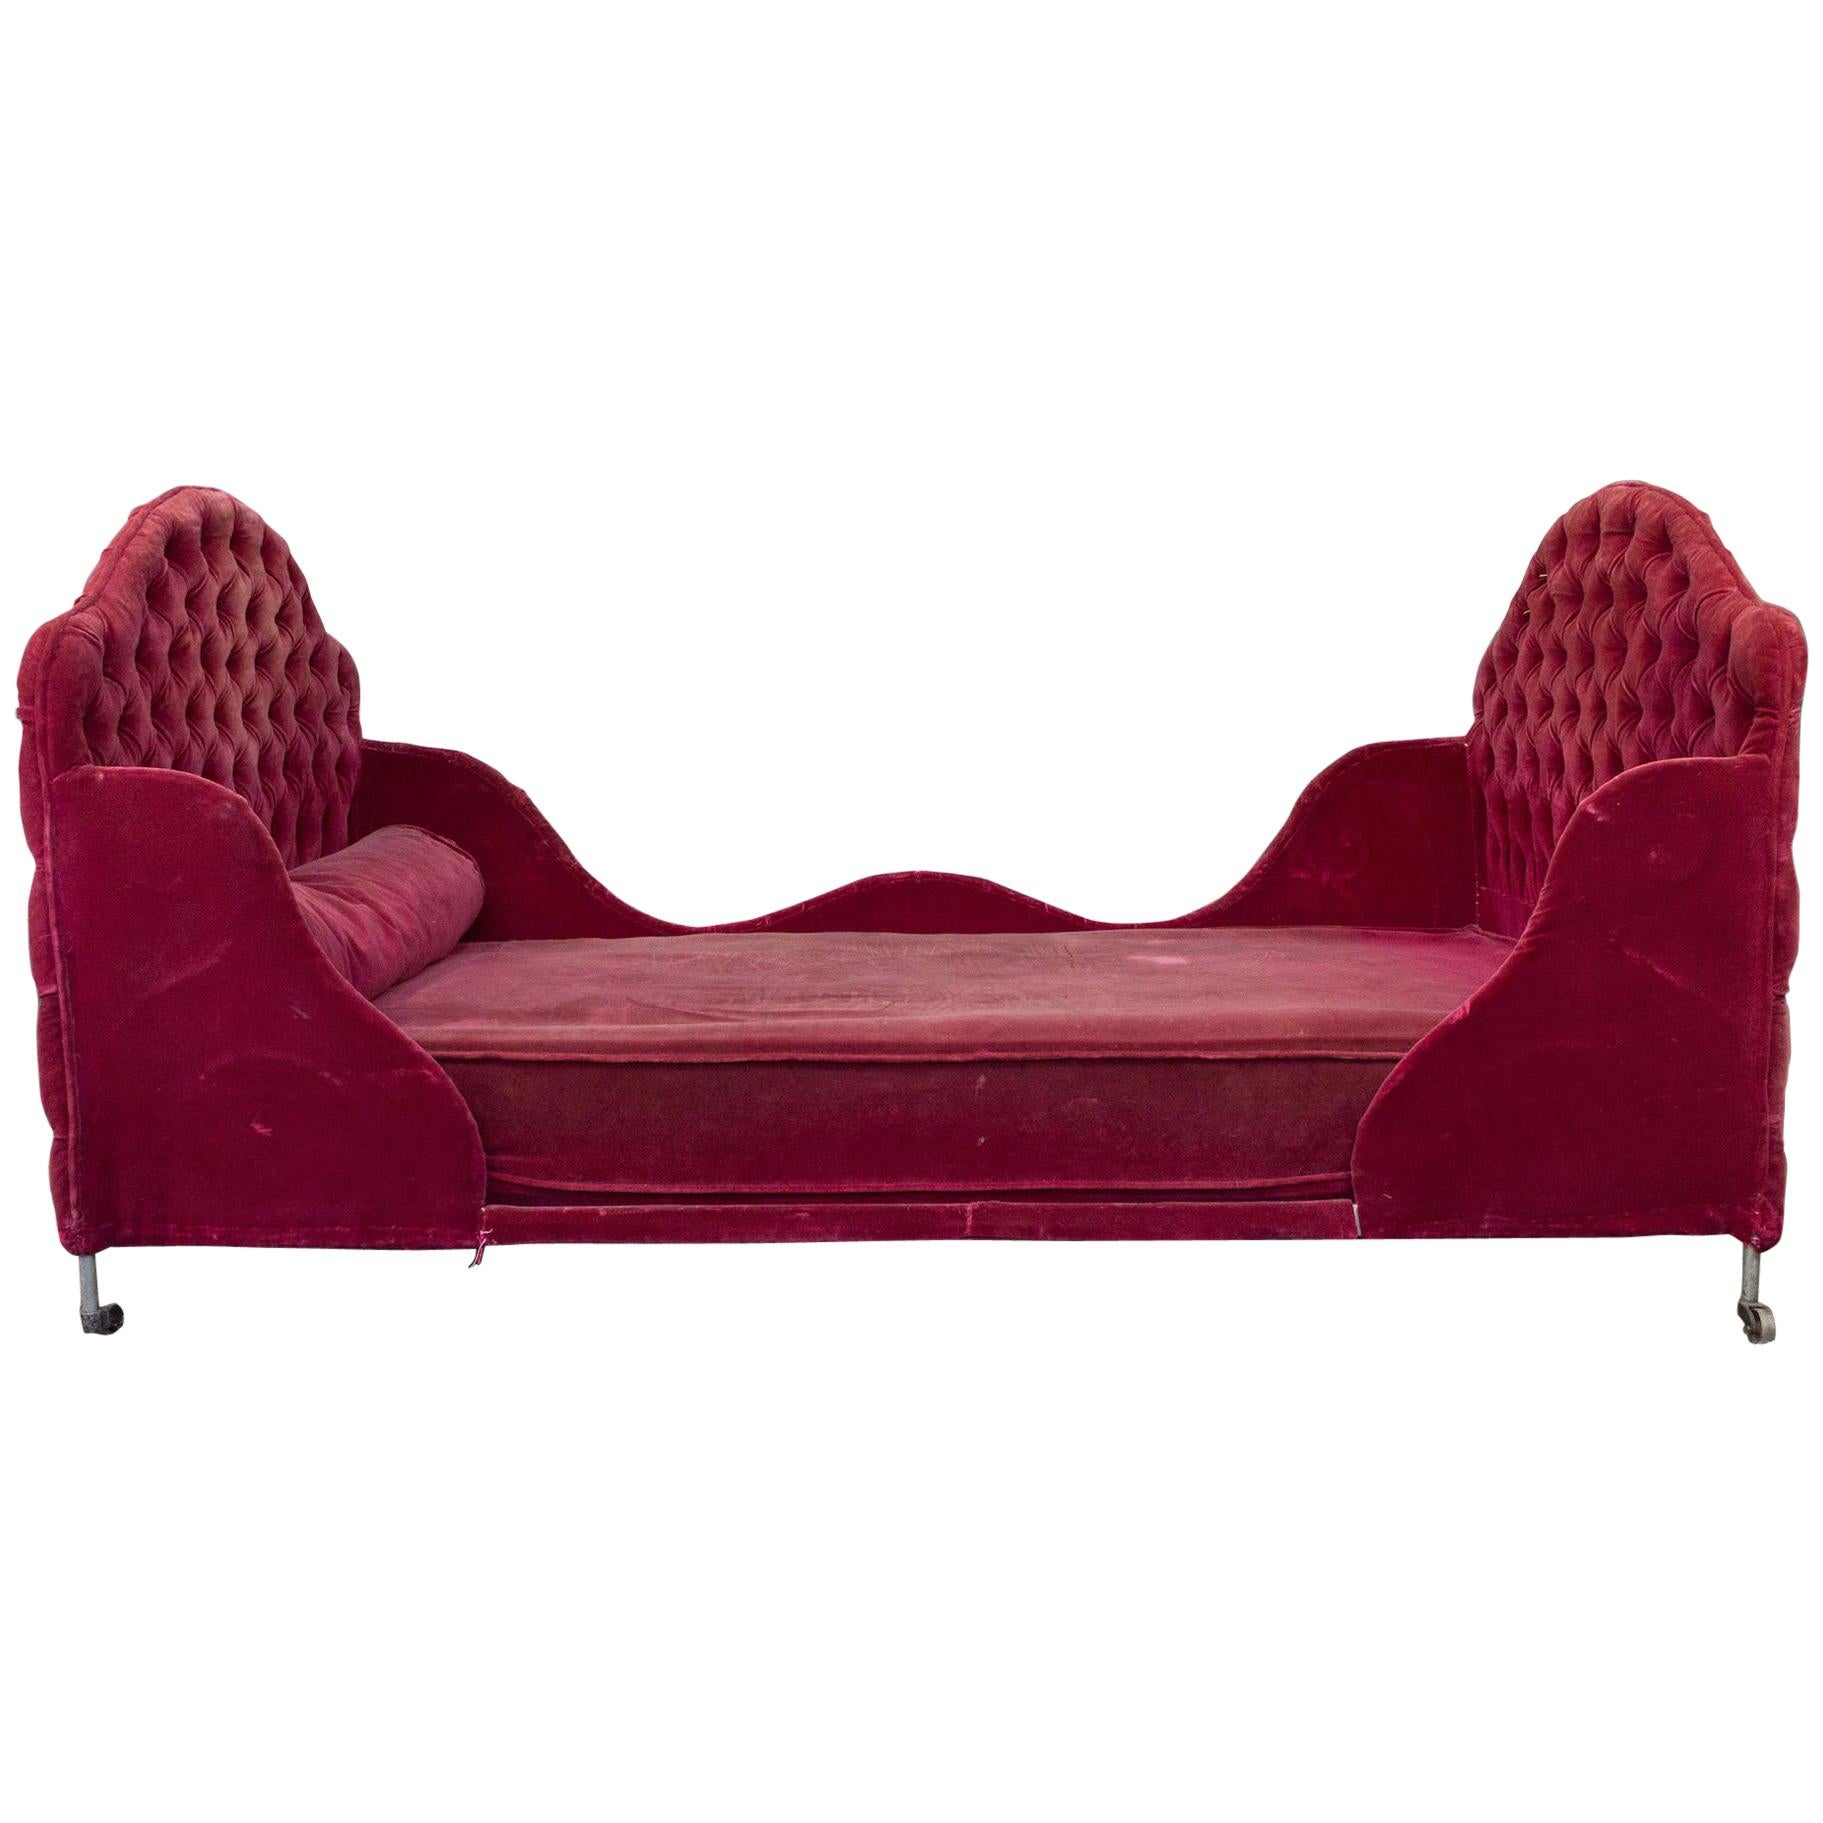 French 19th Century Daybed with Tufted Velvet